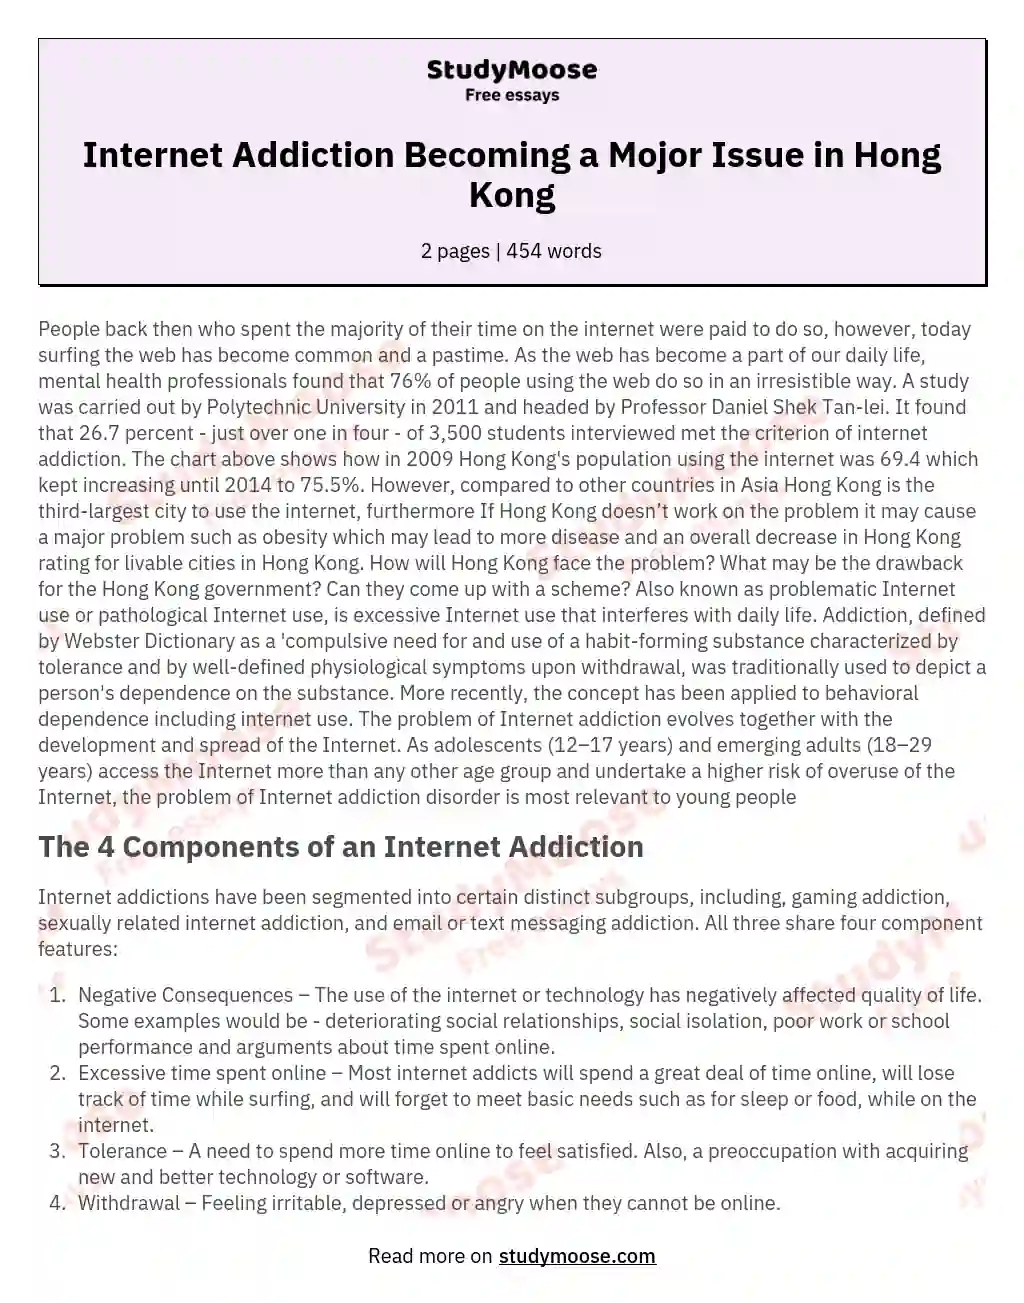 Internet Addiction Becoming a Mojor Issue in Hong Kong essay